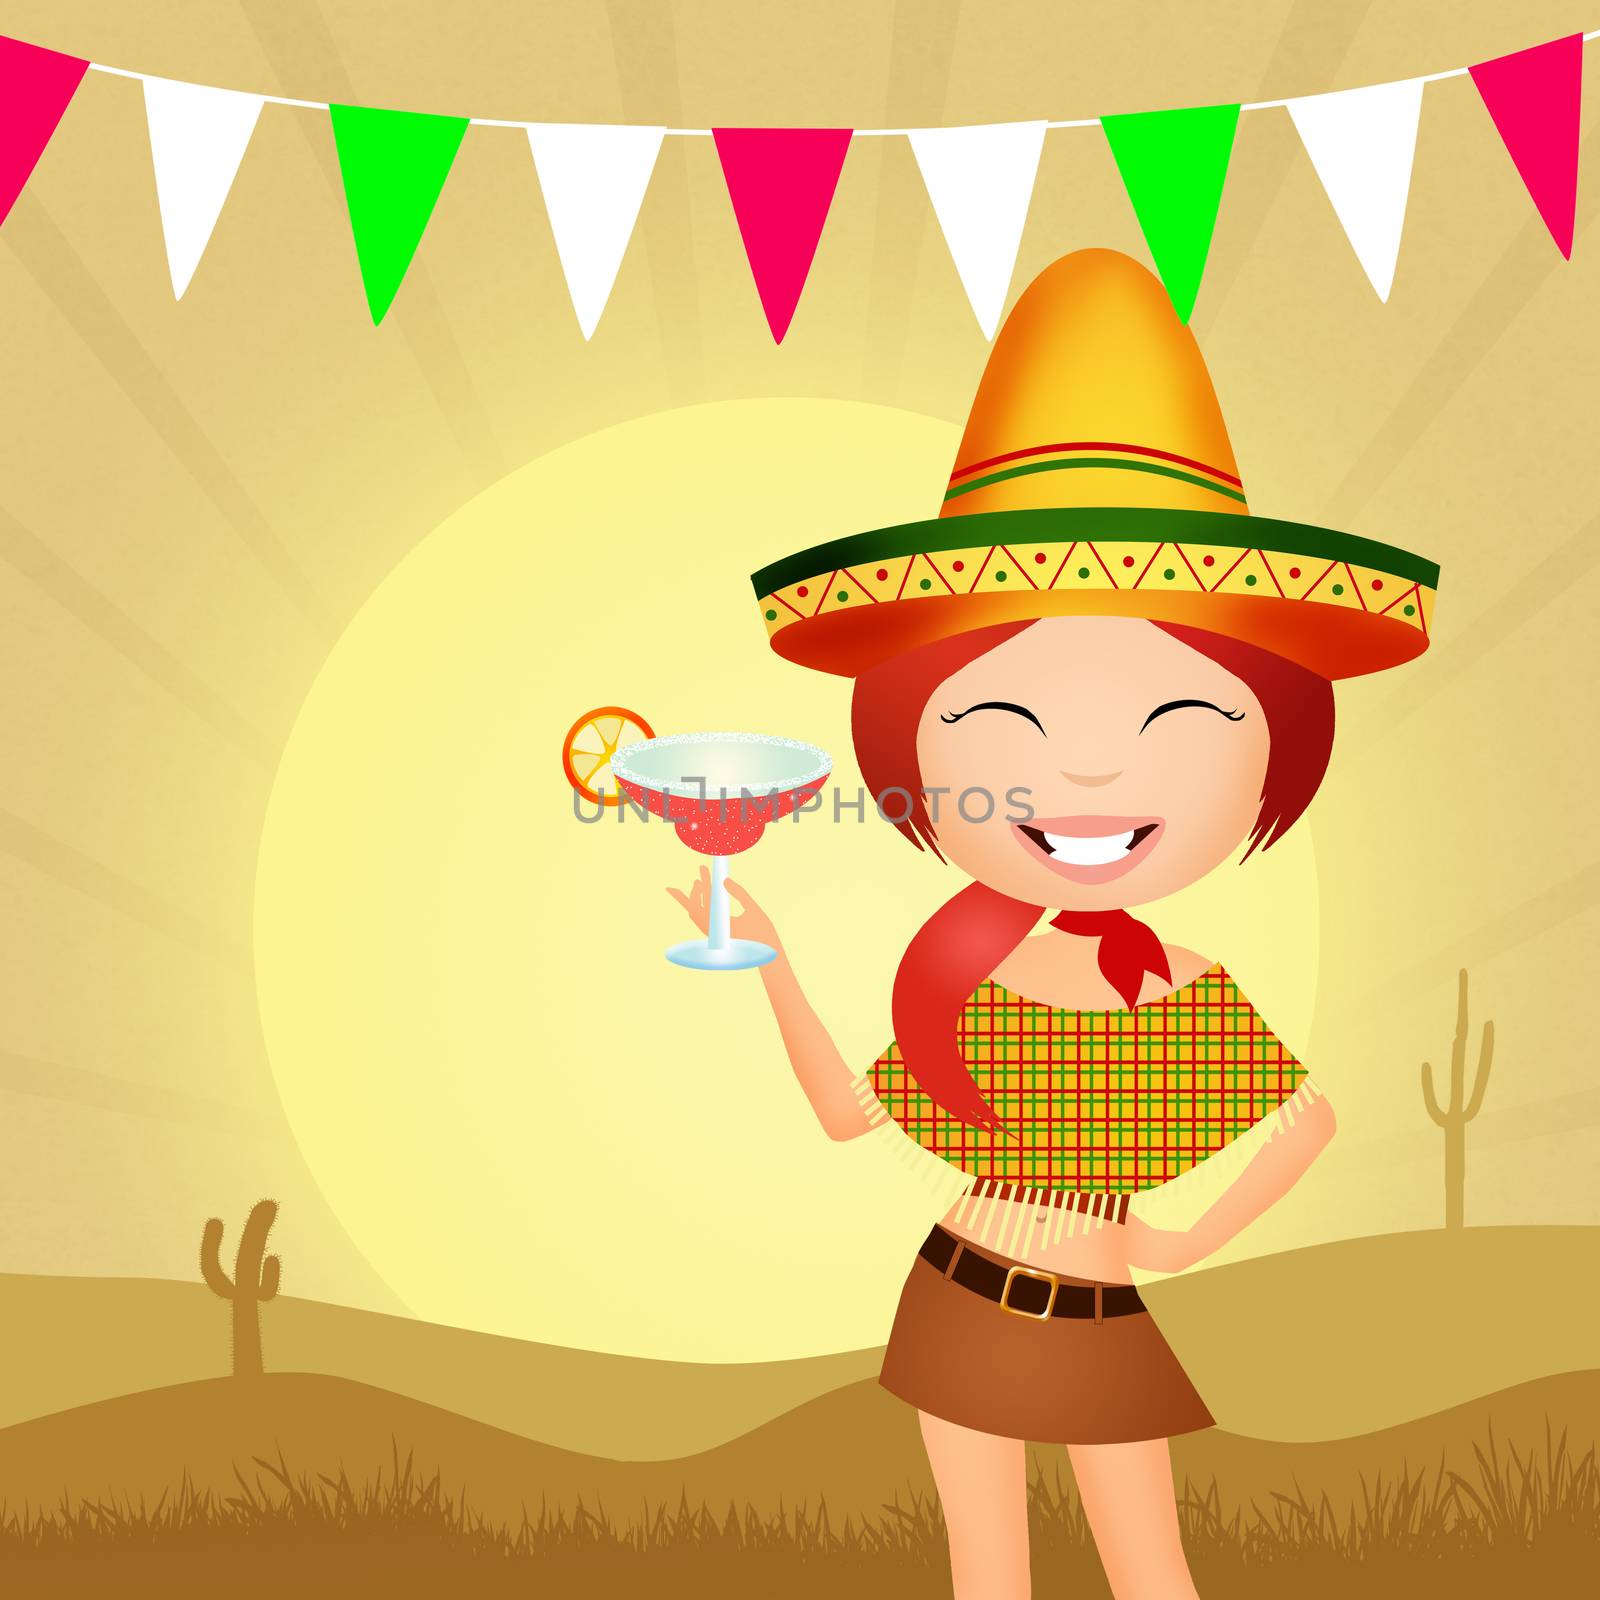 Mexican party by adrenalina